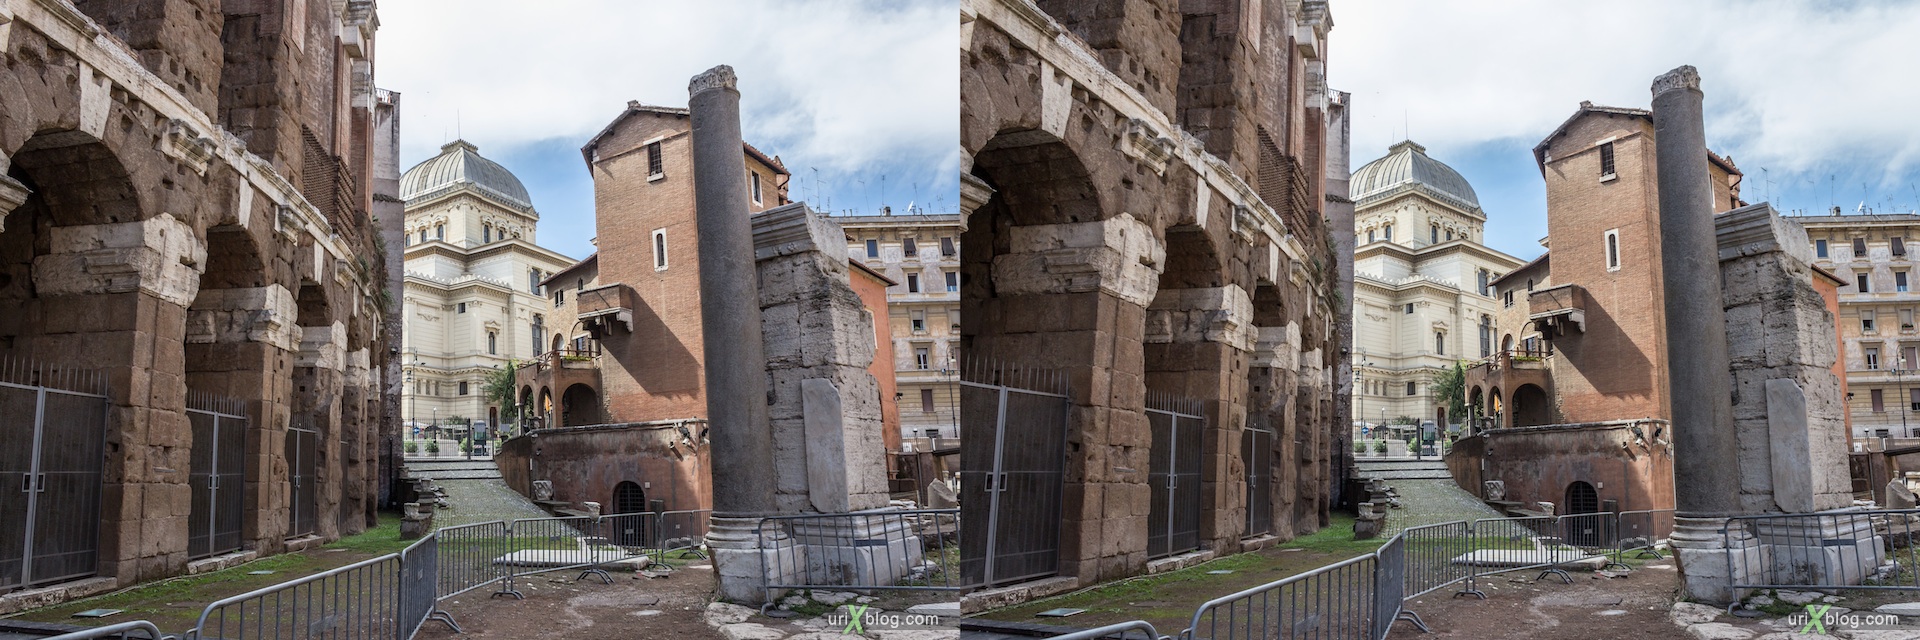 2012, Theater of Marcellus, Temple of Apollo Sosianus, Rome, Italy, 3D, stereo pair, cross-eyed, crossview, cross view stereo pair